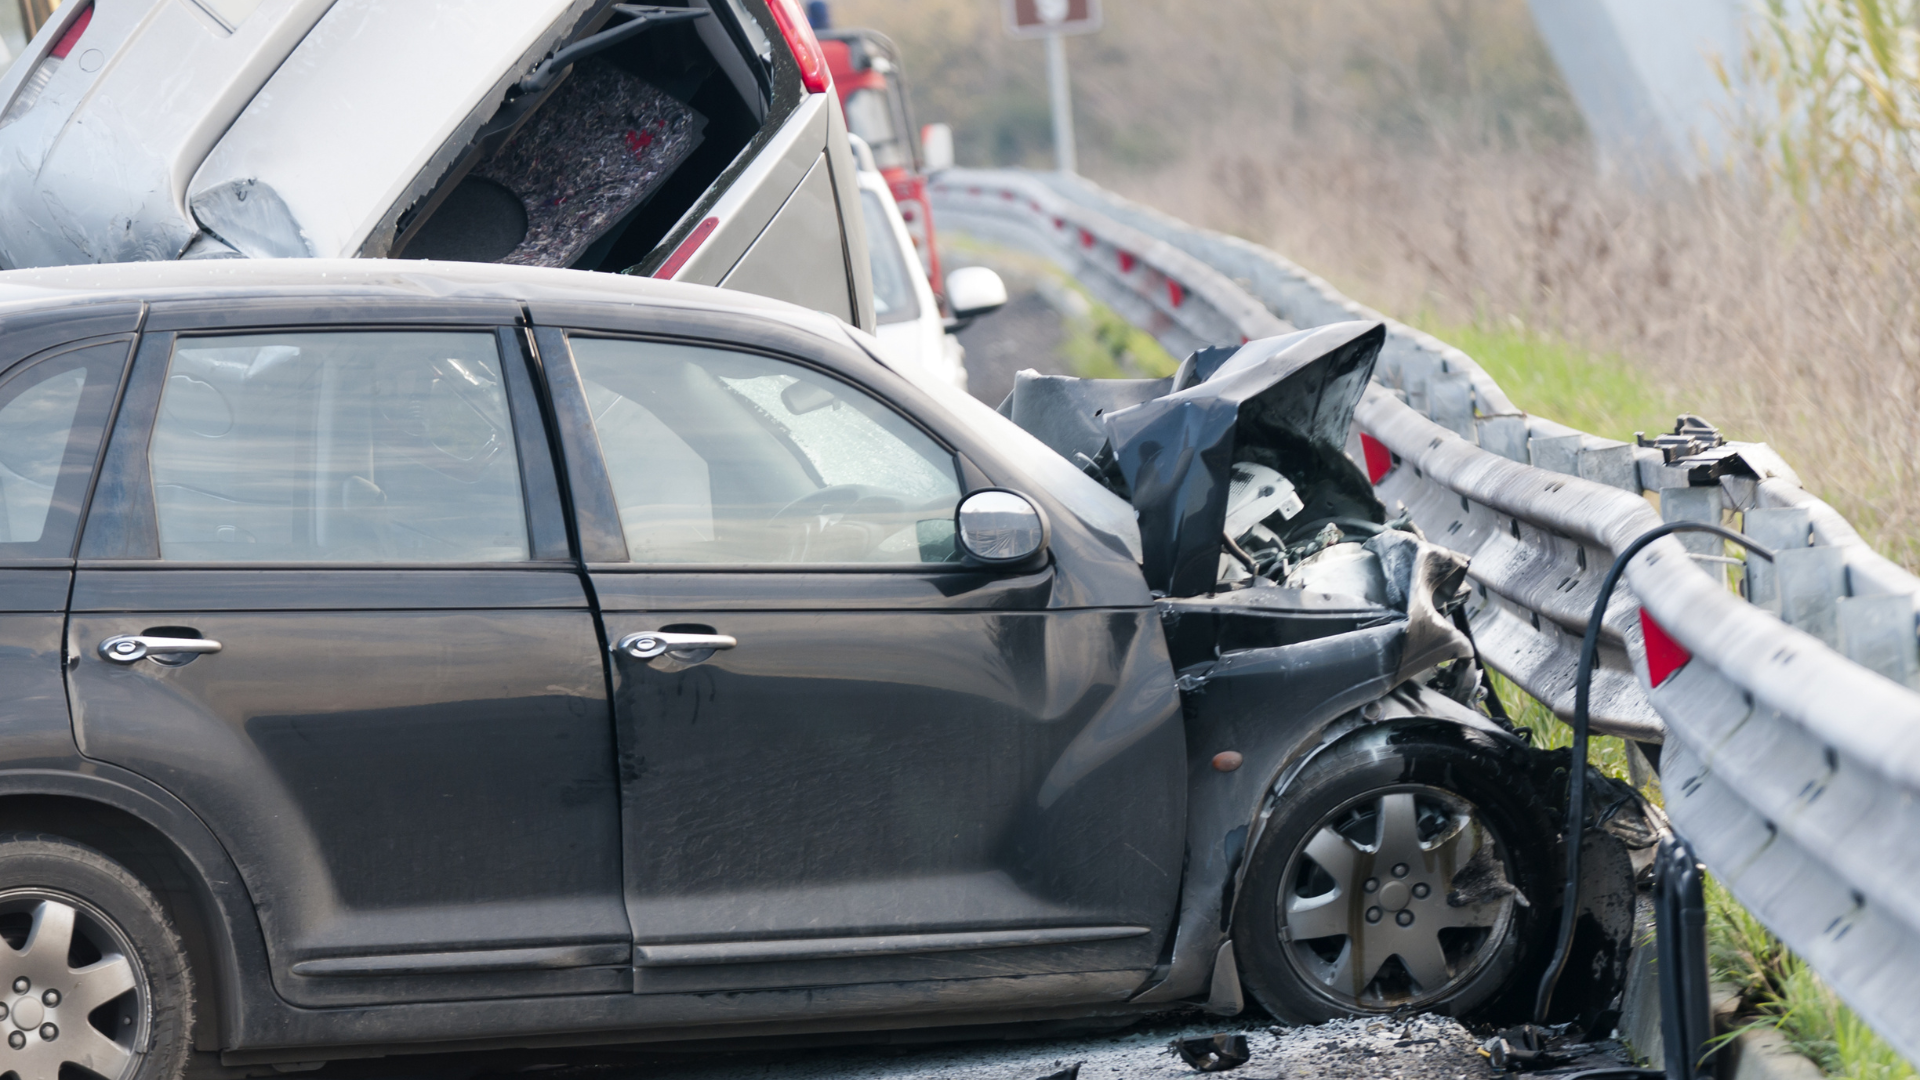 Seeking Medical Treatment After a Car Accident in Miami